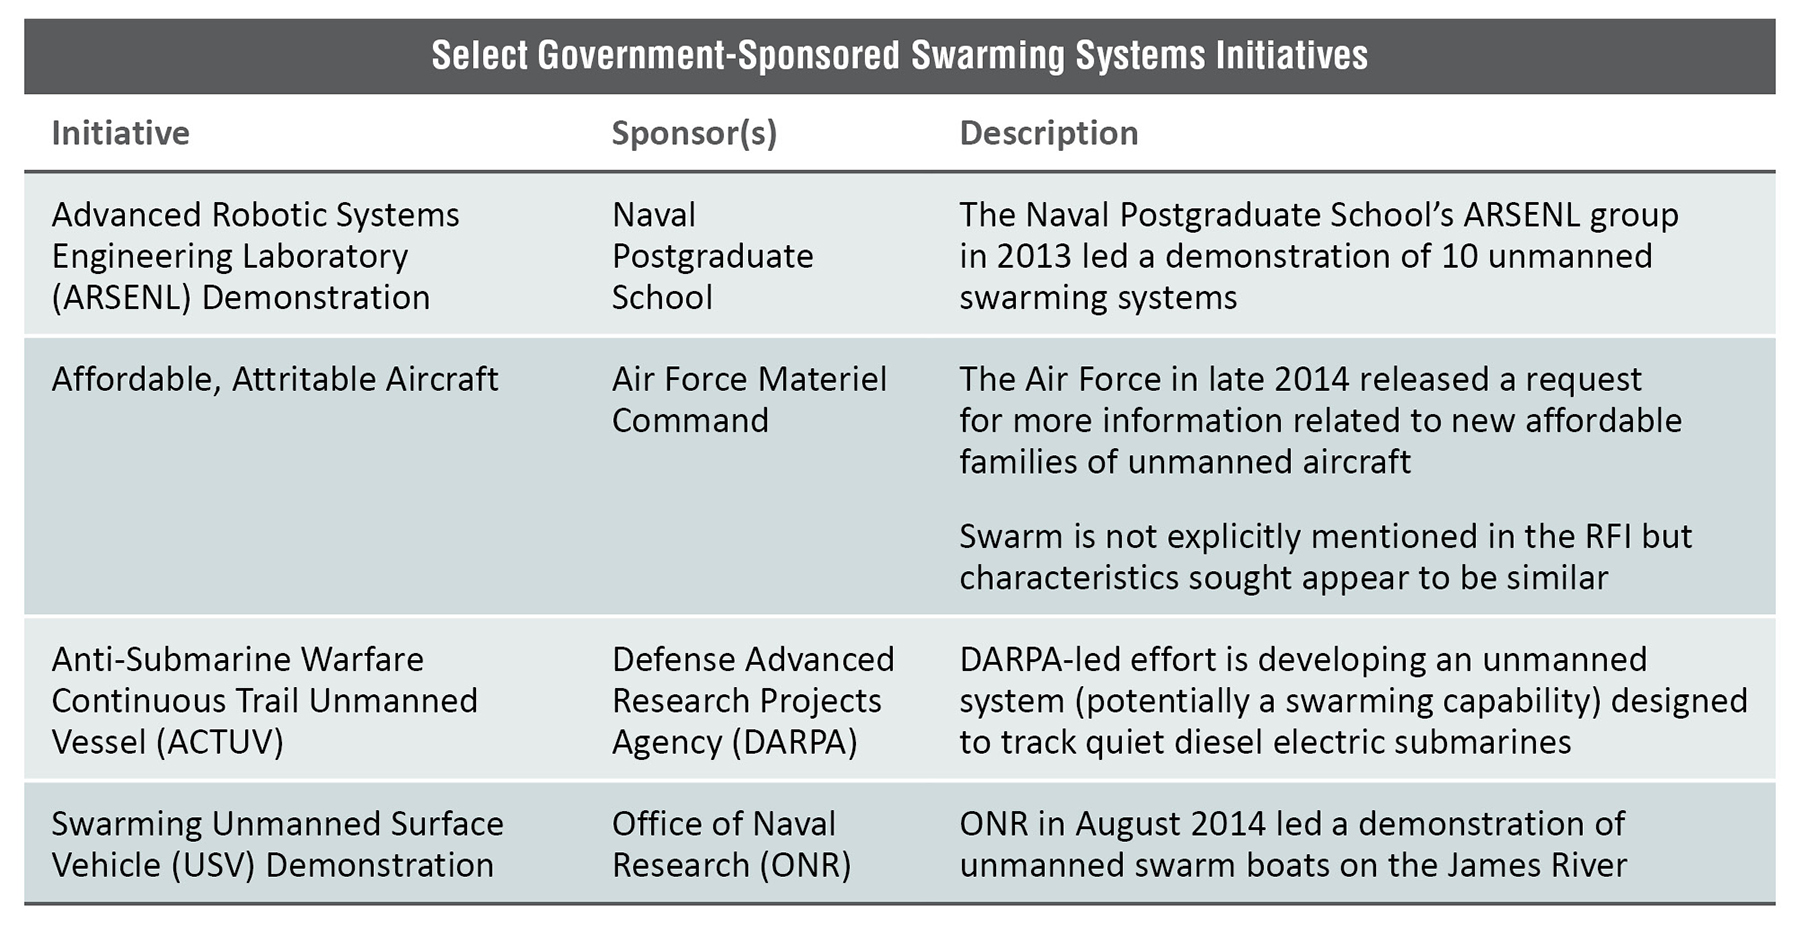 Select Government-Sponsored Swarming Systems Initiatives